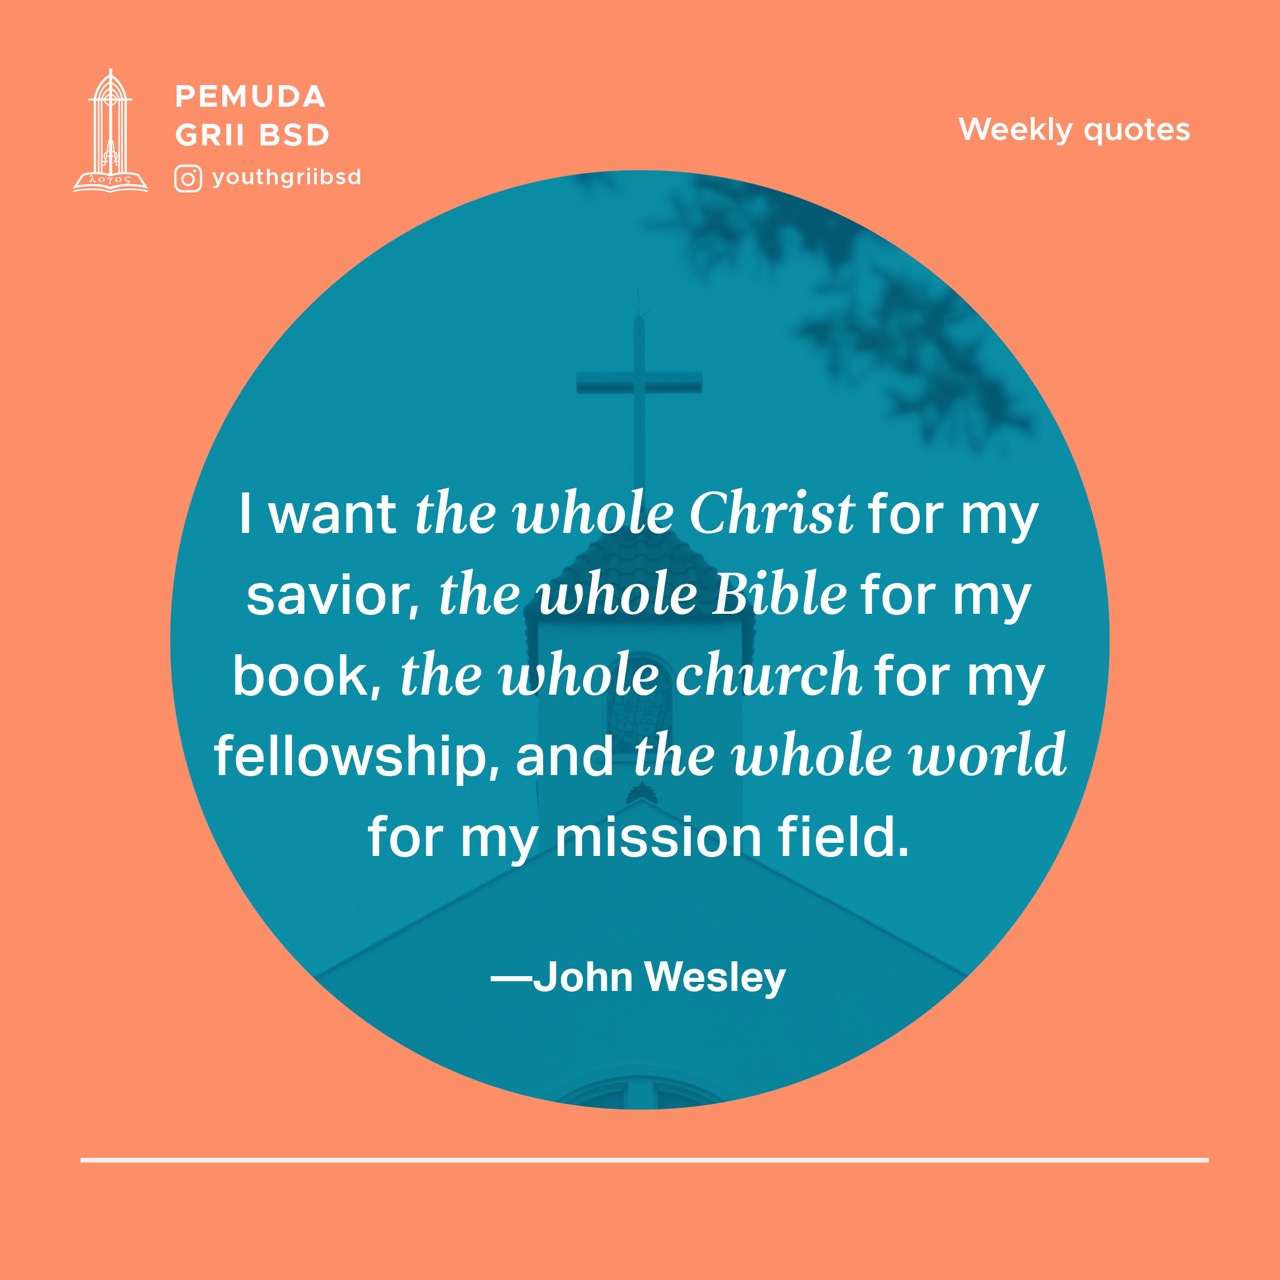 I want the whole Christ for my savior, the whole Bible for my book, the whole church for my fellowship, and the whole world for my mission field.